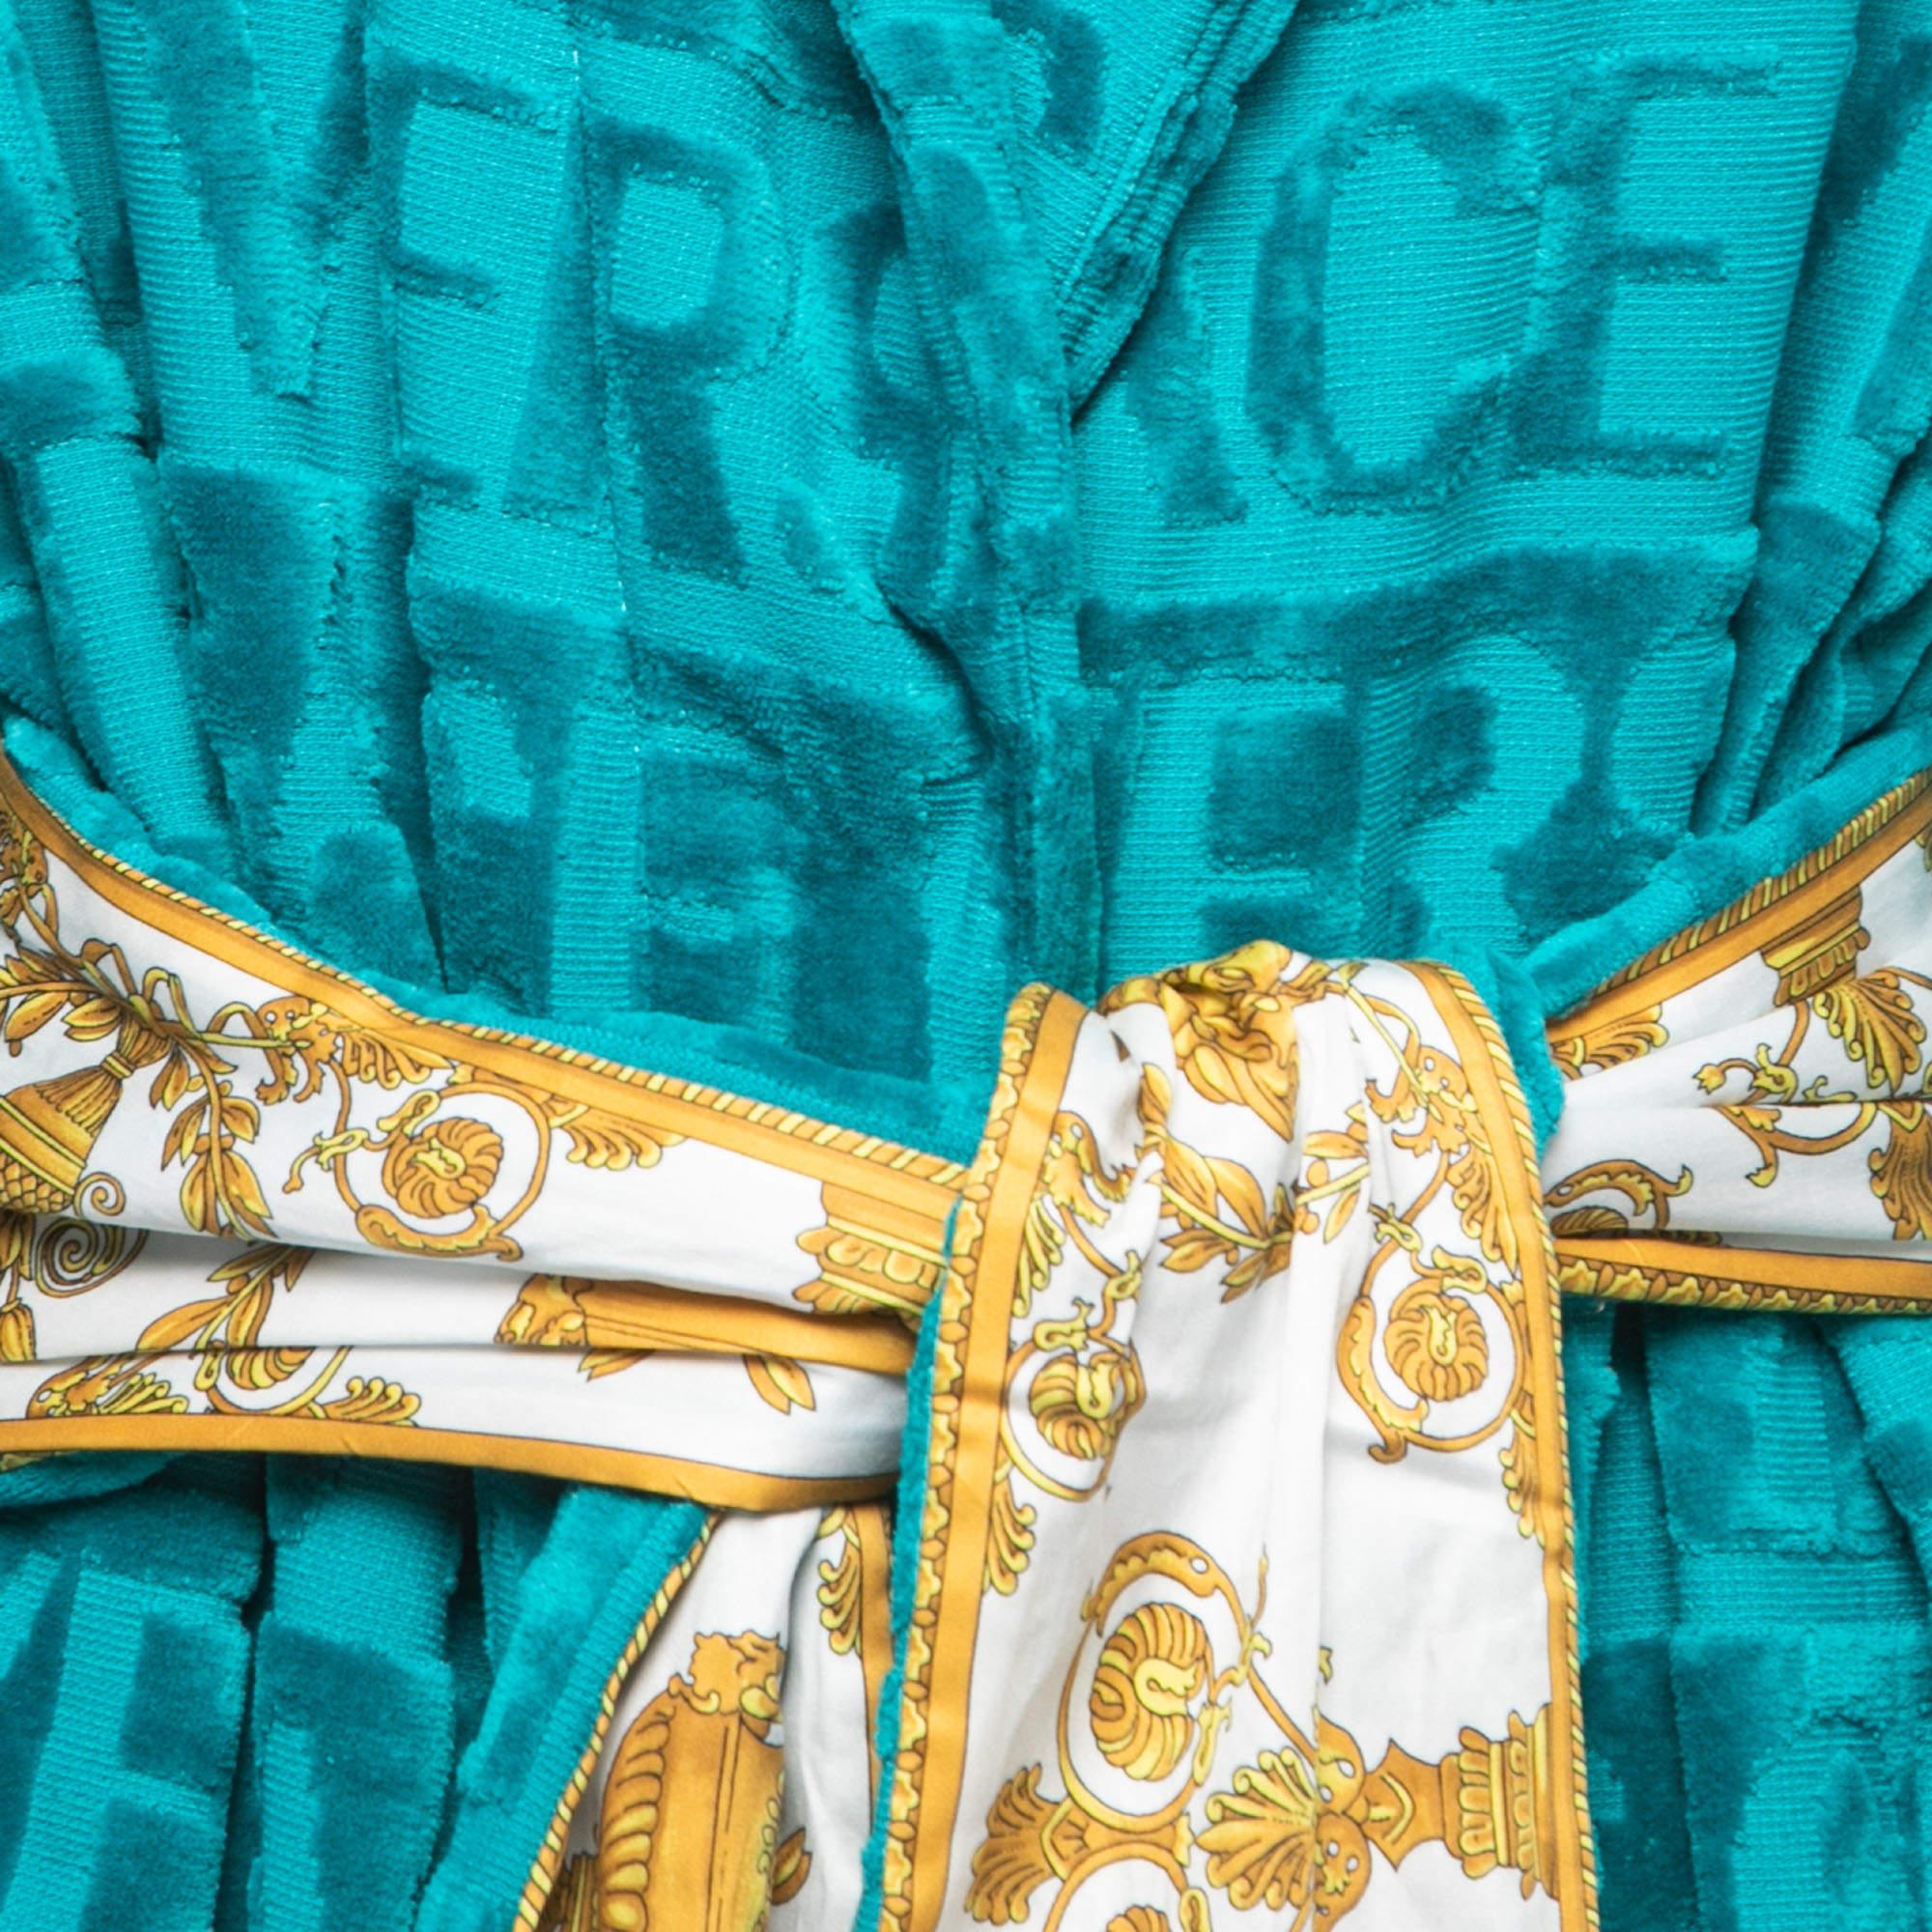 The Versace Home bathrobe exudes luxury and style. Crafted from plush terry fabric in a vibrant green hue, it features the iconic Versace logo pattern. With a belted waist, this robe offers comfort and sophistication for a lavish home spa